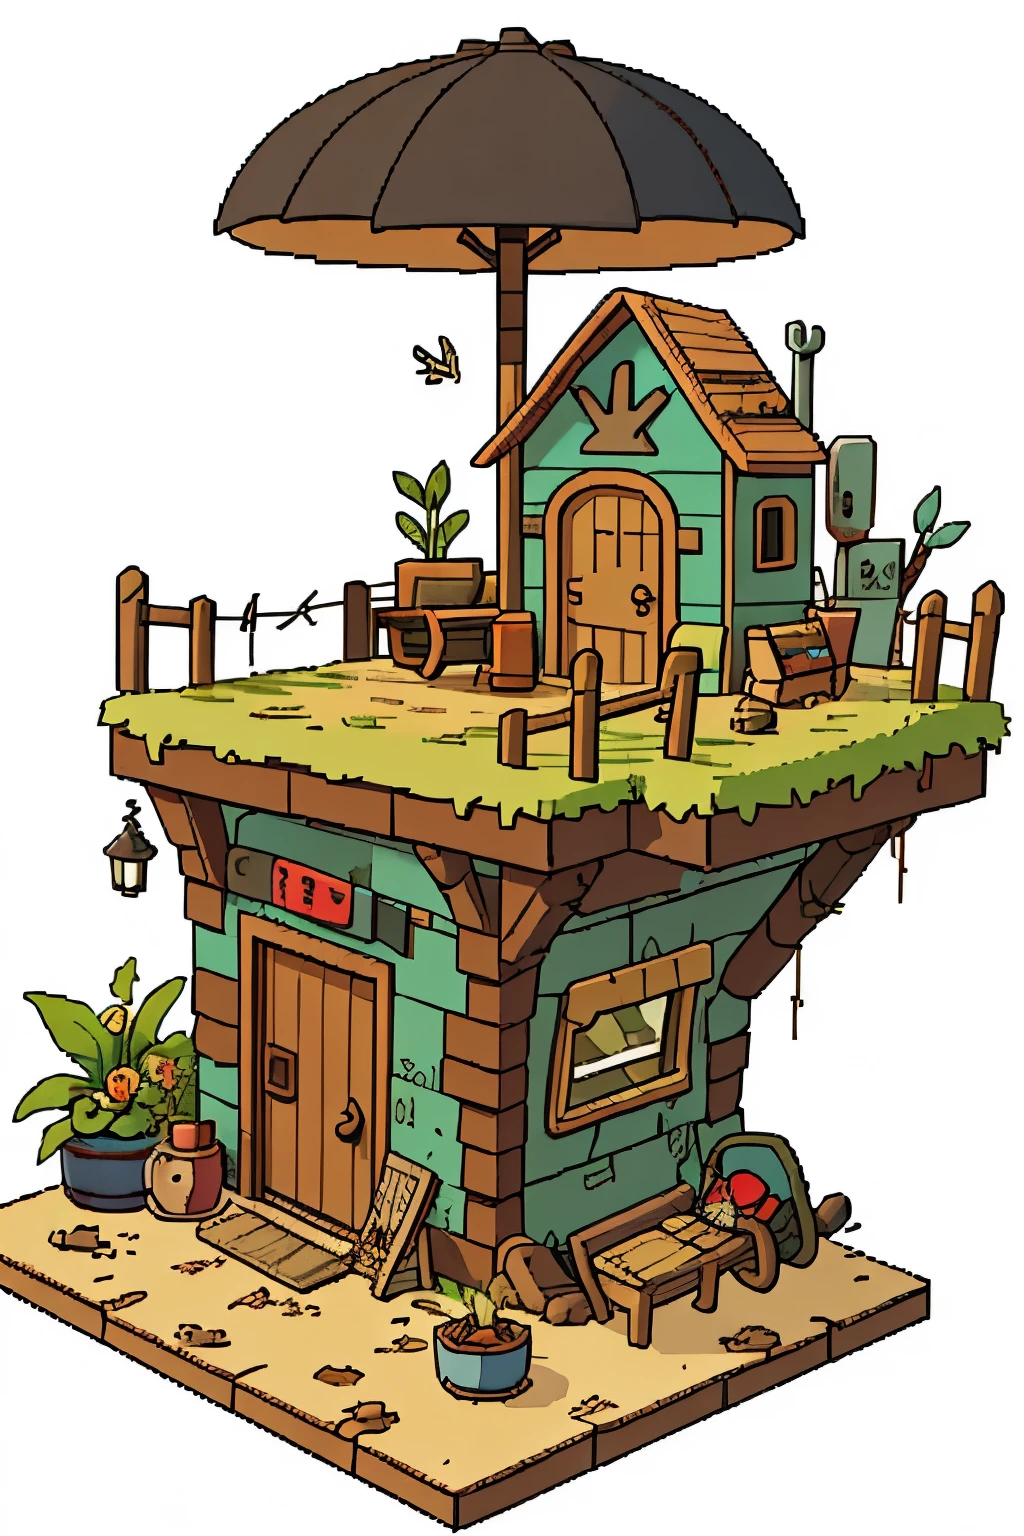 pixel,the girl writes,wanderer in robes, in the cabin of the plane,Small wooden table,sitting on a wooden chair, ruined area, (destroyed house), (spikes, tires,barbed wire,Masked wanderer, Reading,potted plant,spear sticks behind your back,((apocalypse style garage,buggy)),sand,White background,